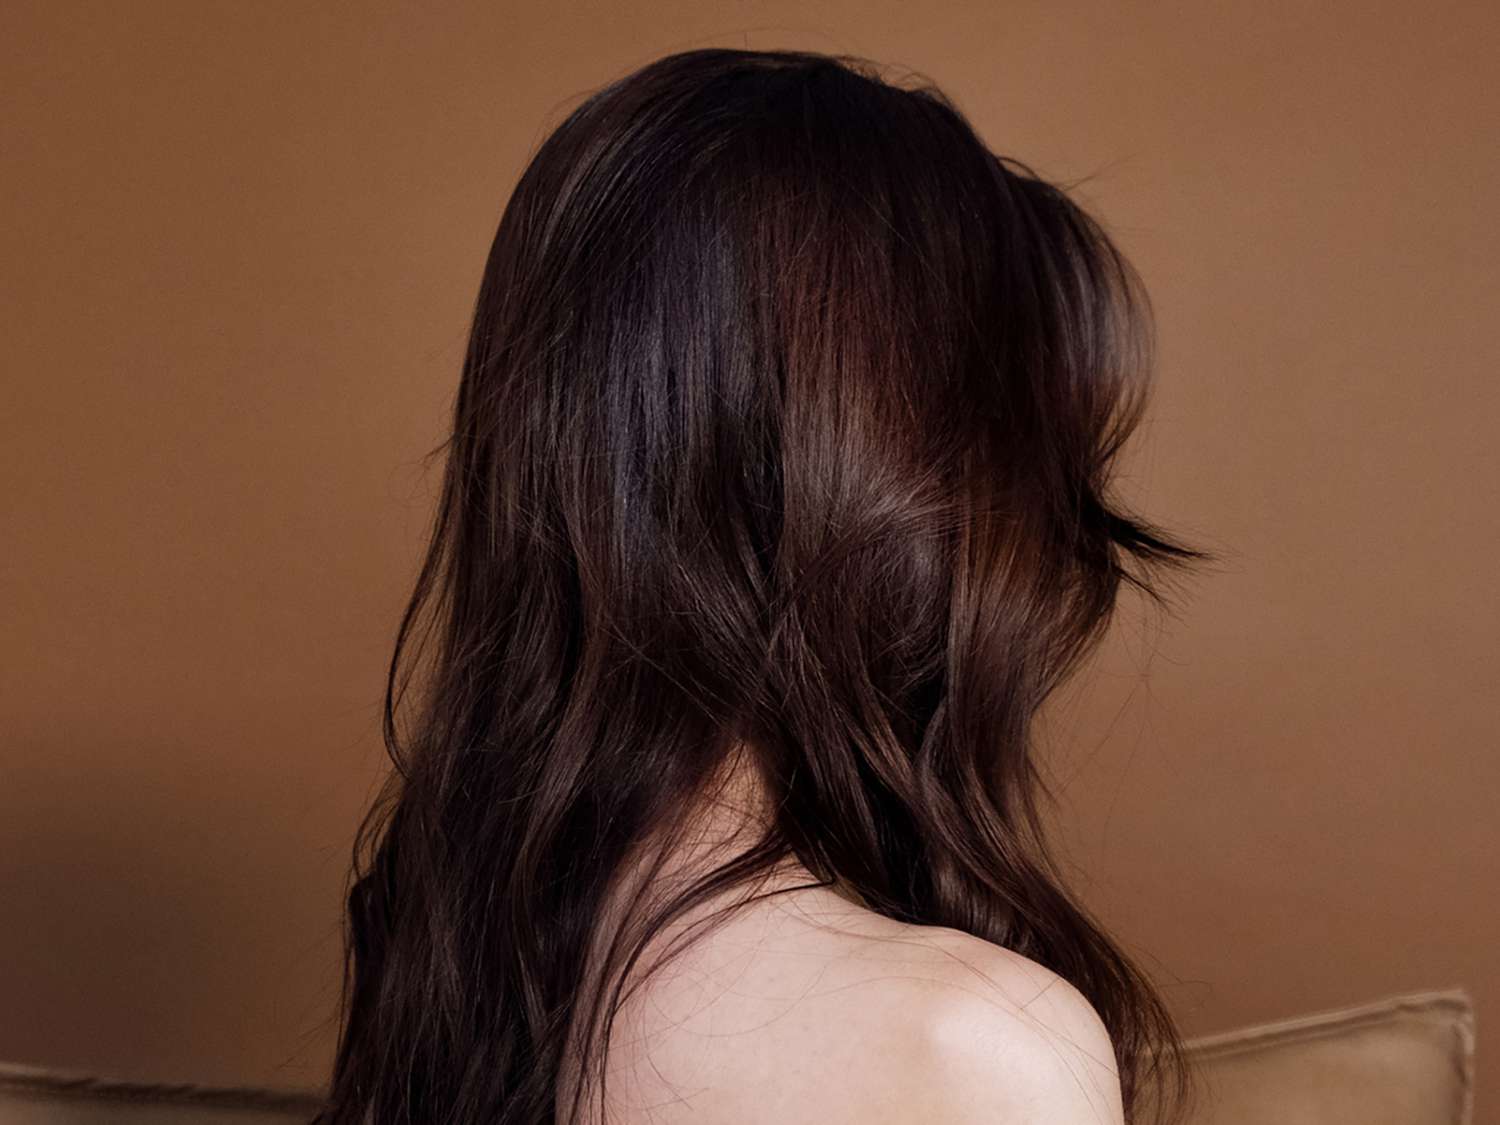 A woman with long, dark hair, covering her face, viewed from side profile. 